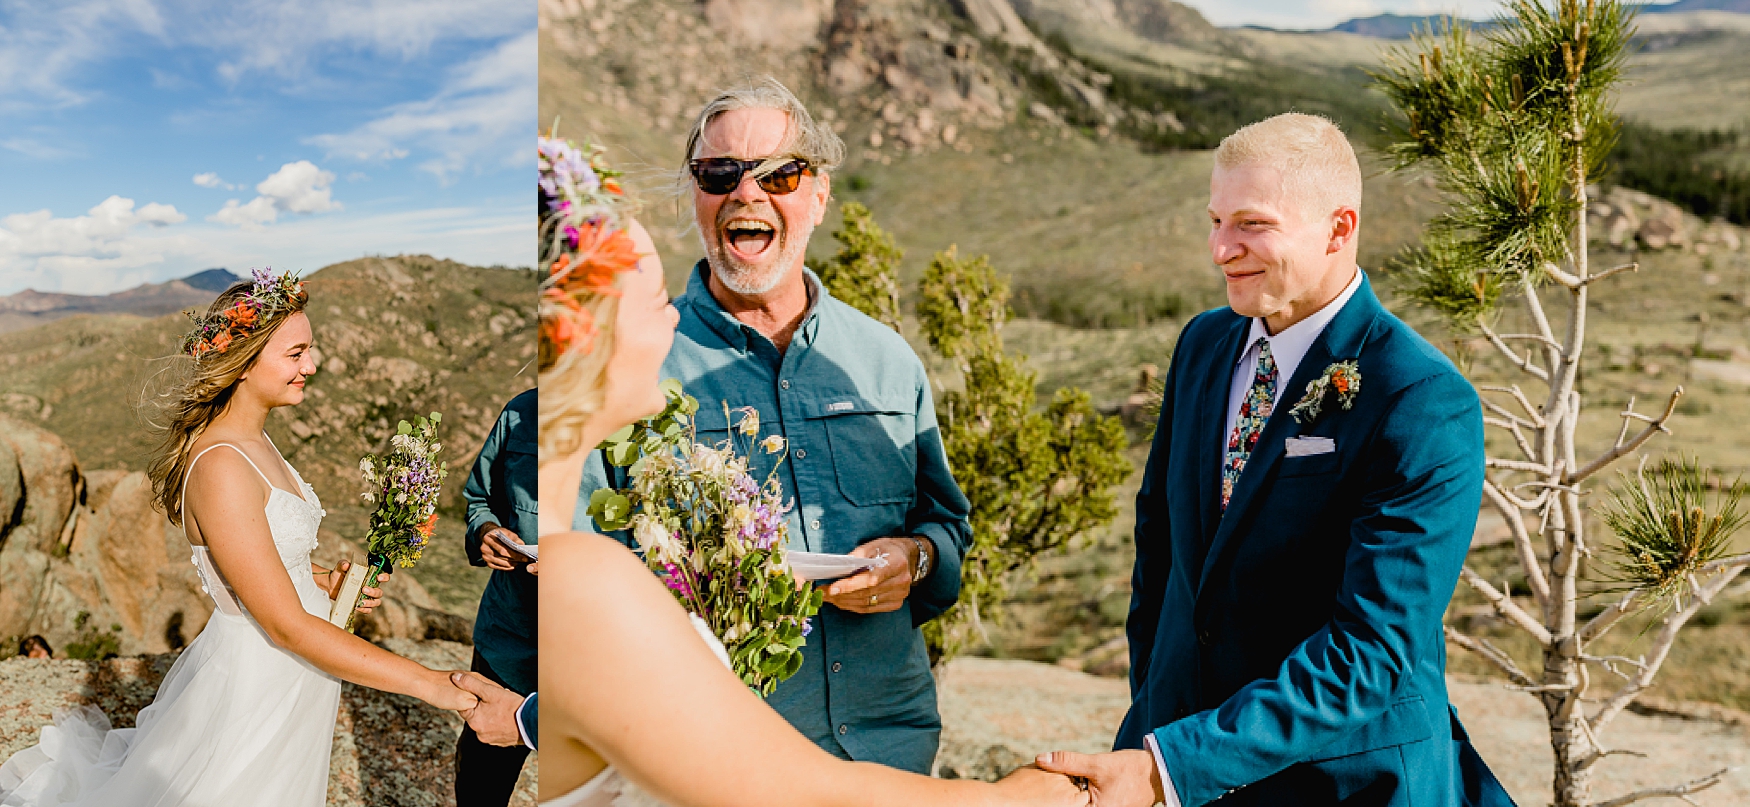 bride and groom during Colorado elopement ceremony saying vows in the mountains